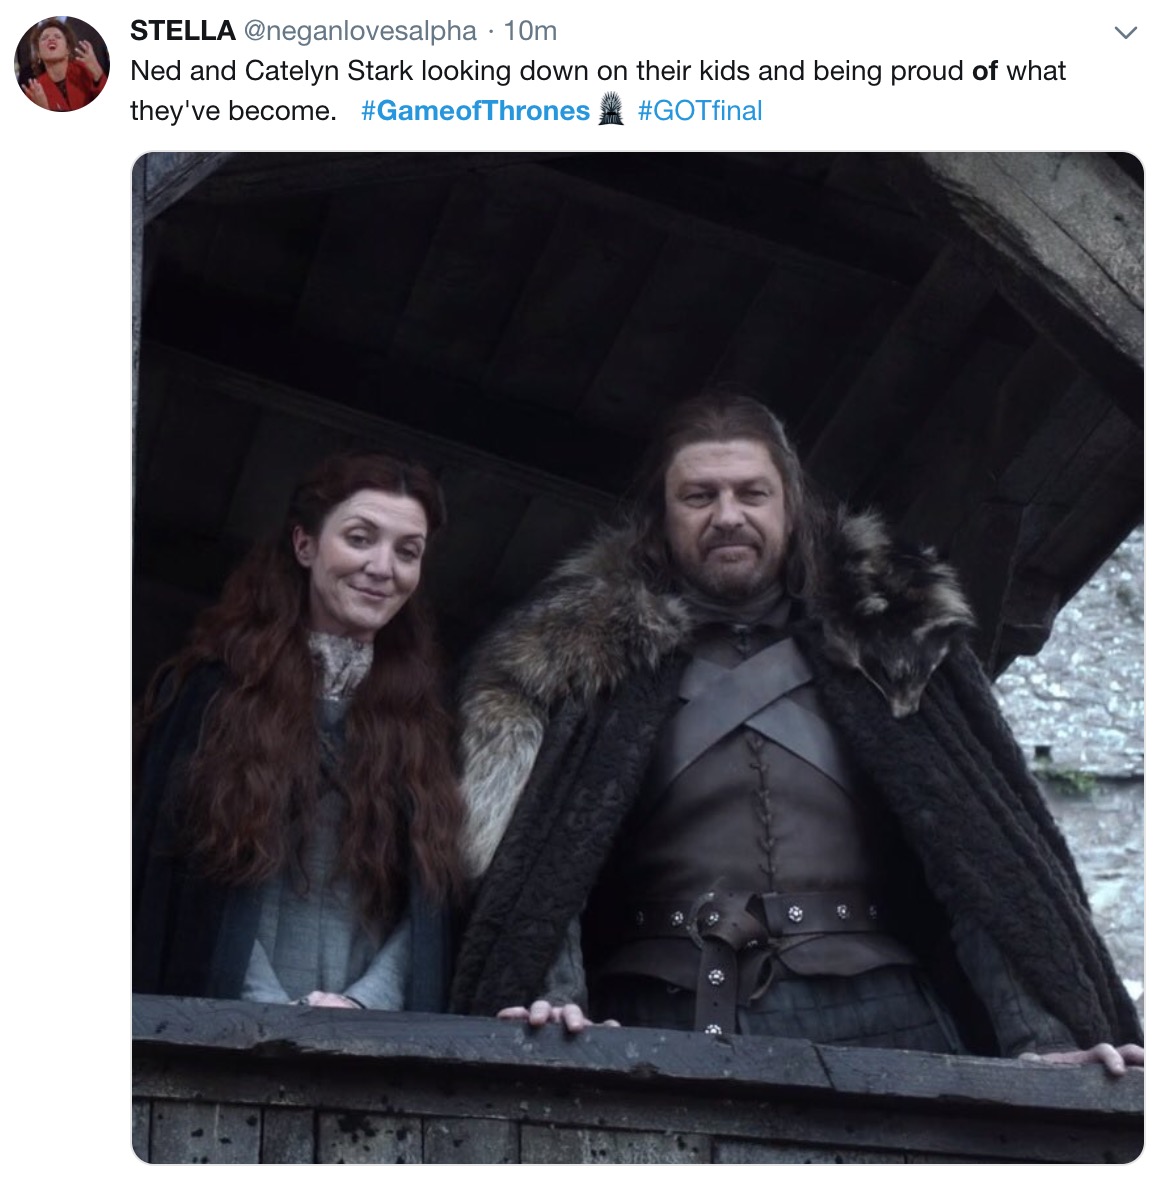 game of thrones final episode meme - Game of Thrones - Stella 10m Ned and Catelyn Stark looking down on their kids and being proud of what they've become.